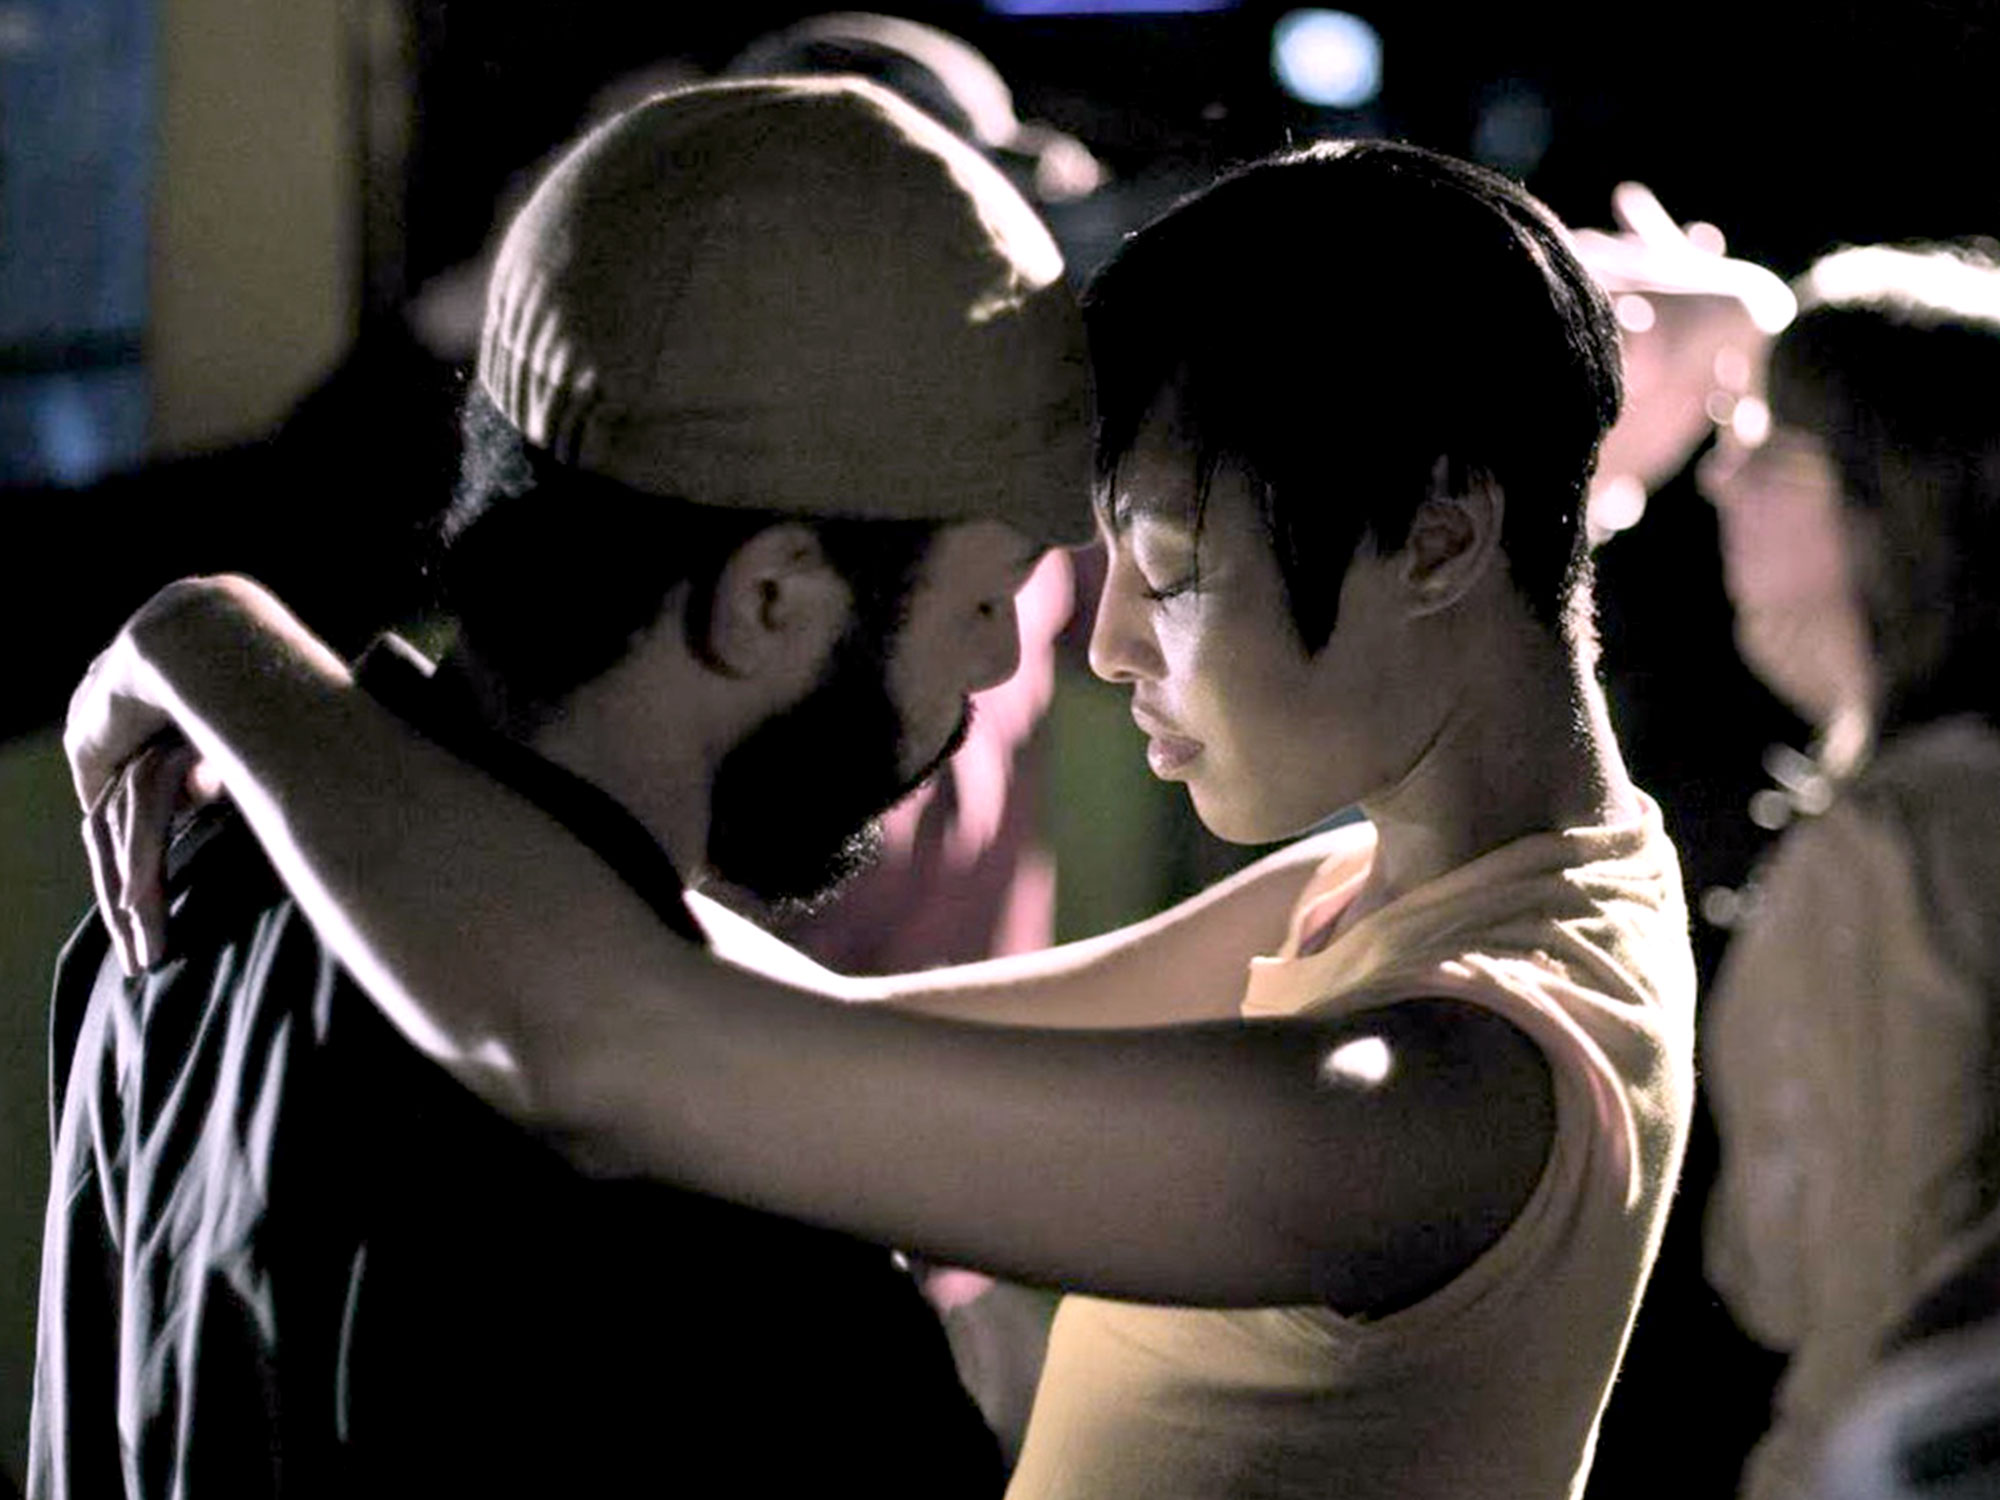 Wyatt Cenac and Tracey Heggins in Medicine for Melancholy, the first film written and directed by Barry Jenkins, who also made Moonlight.